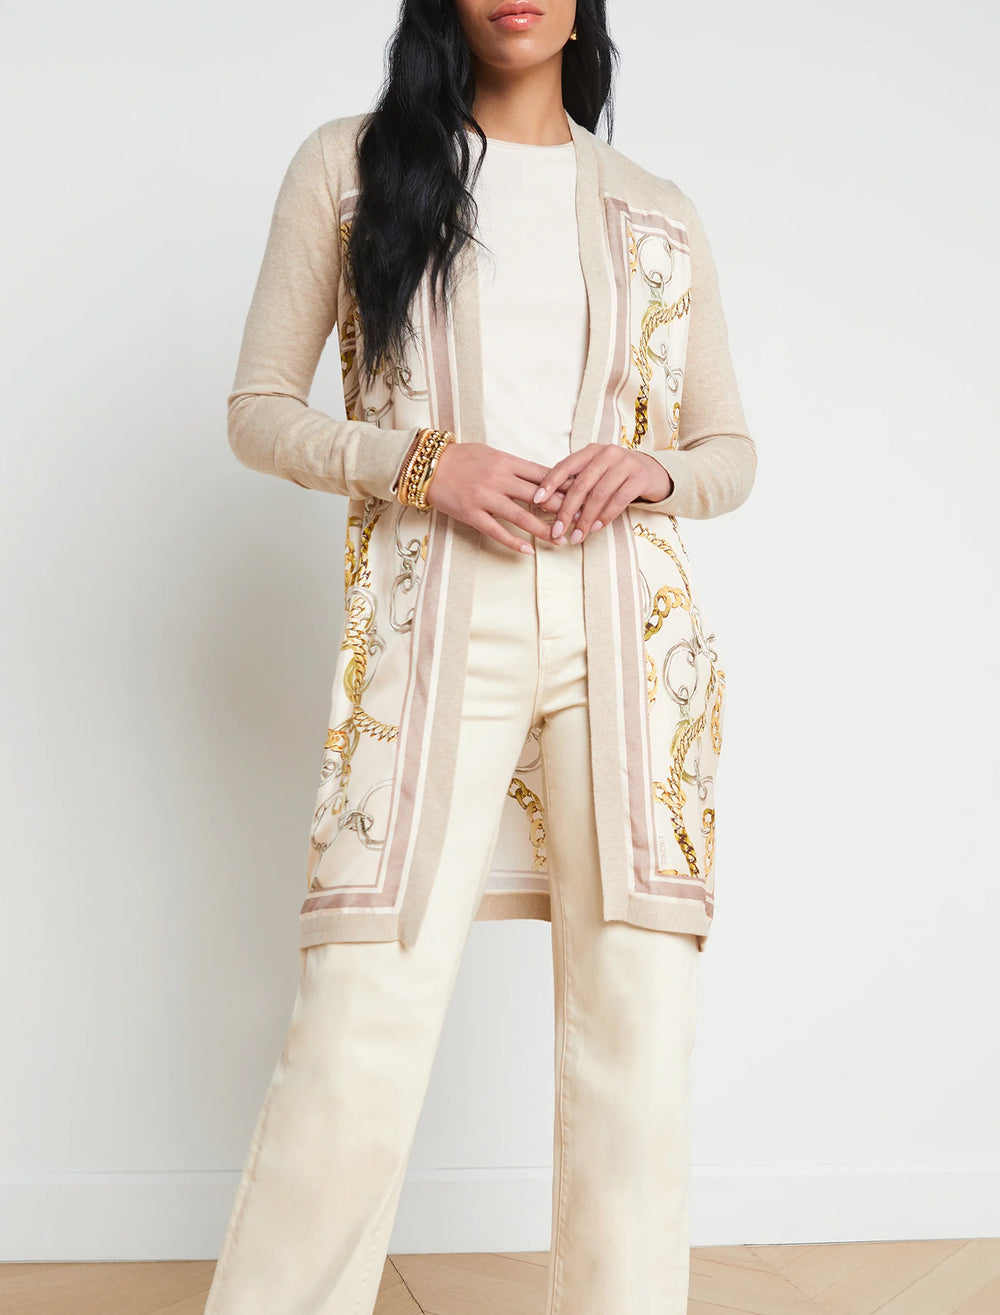 Model wearing L'agence's beverly silk panel cardi in crema.